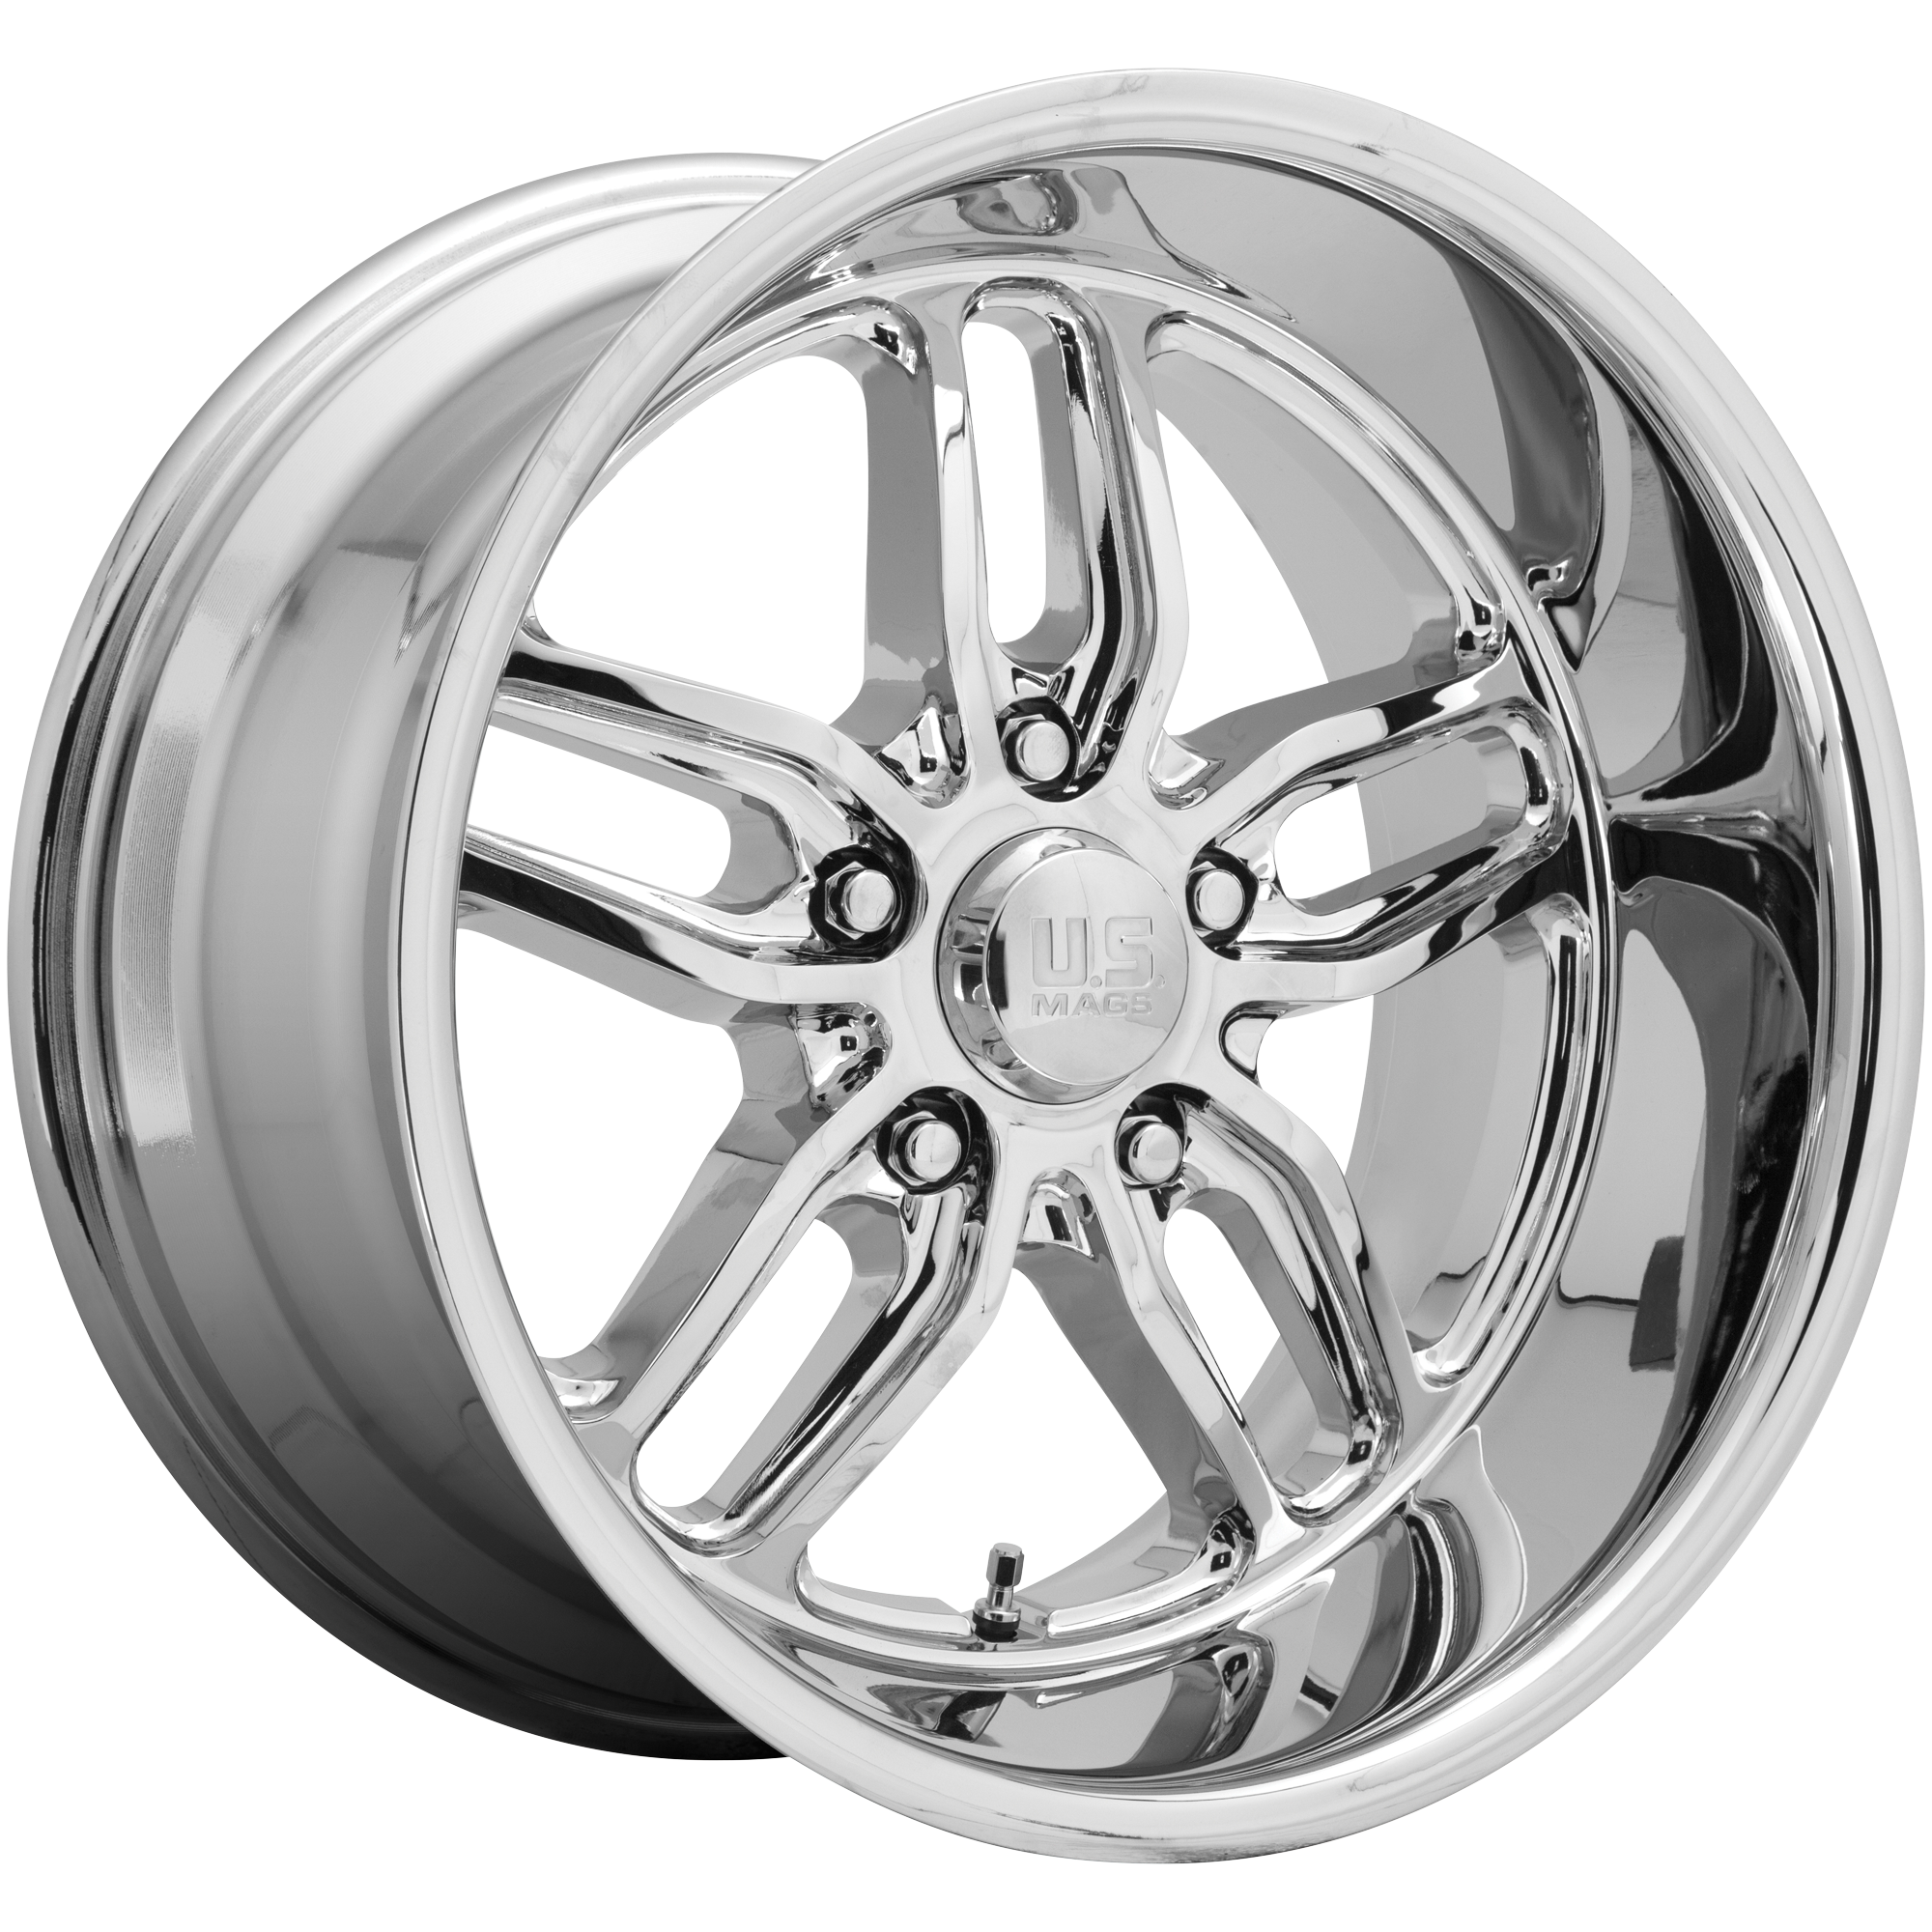 CTEN 20x8.5 5x127.00 CHROME PLATED (7 mm) - Tires and Engine Performance